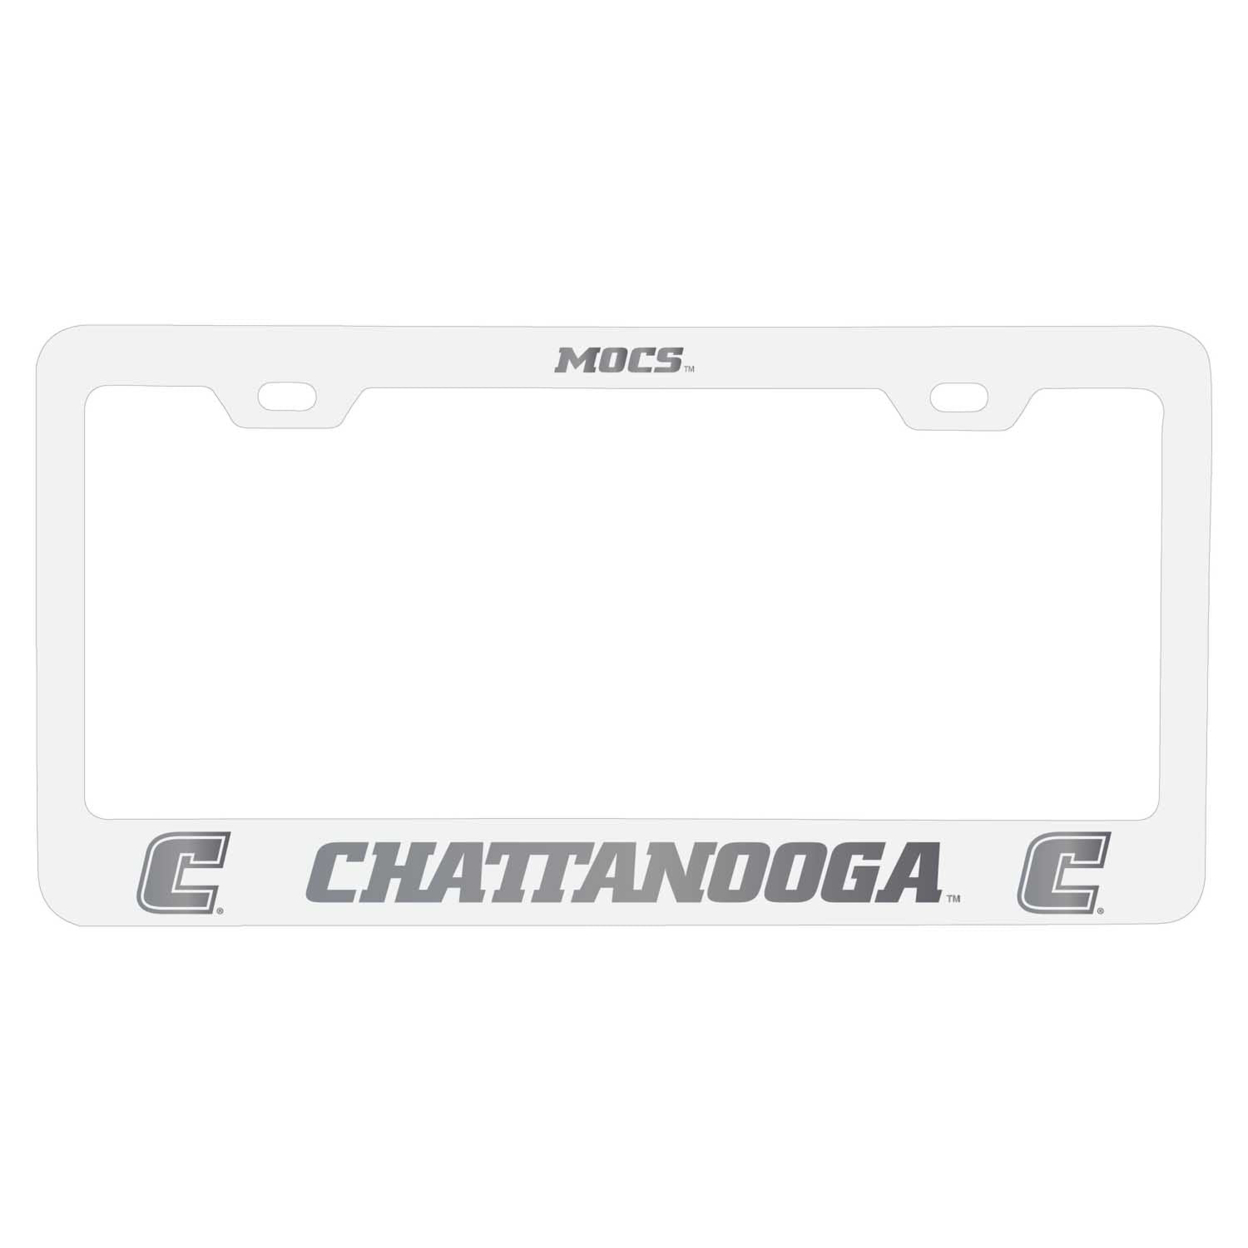 University Of Tennessee At Chattanooga Etched Metal License Plate Frame Choose Your Color